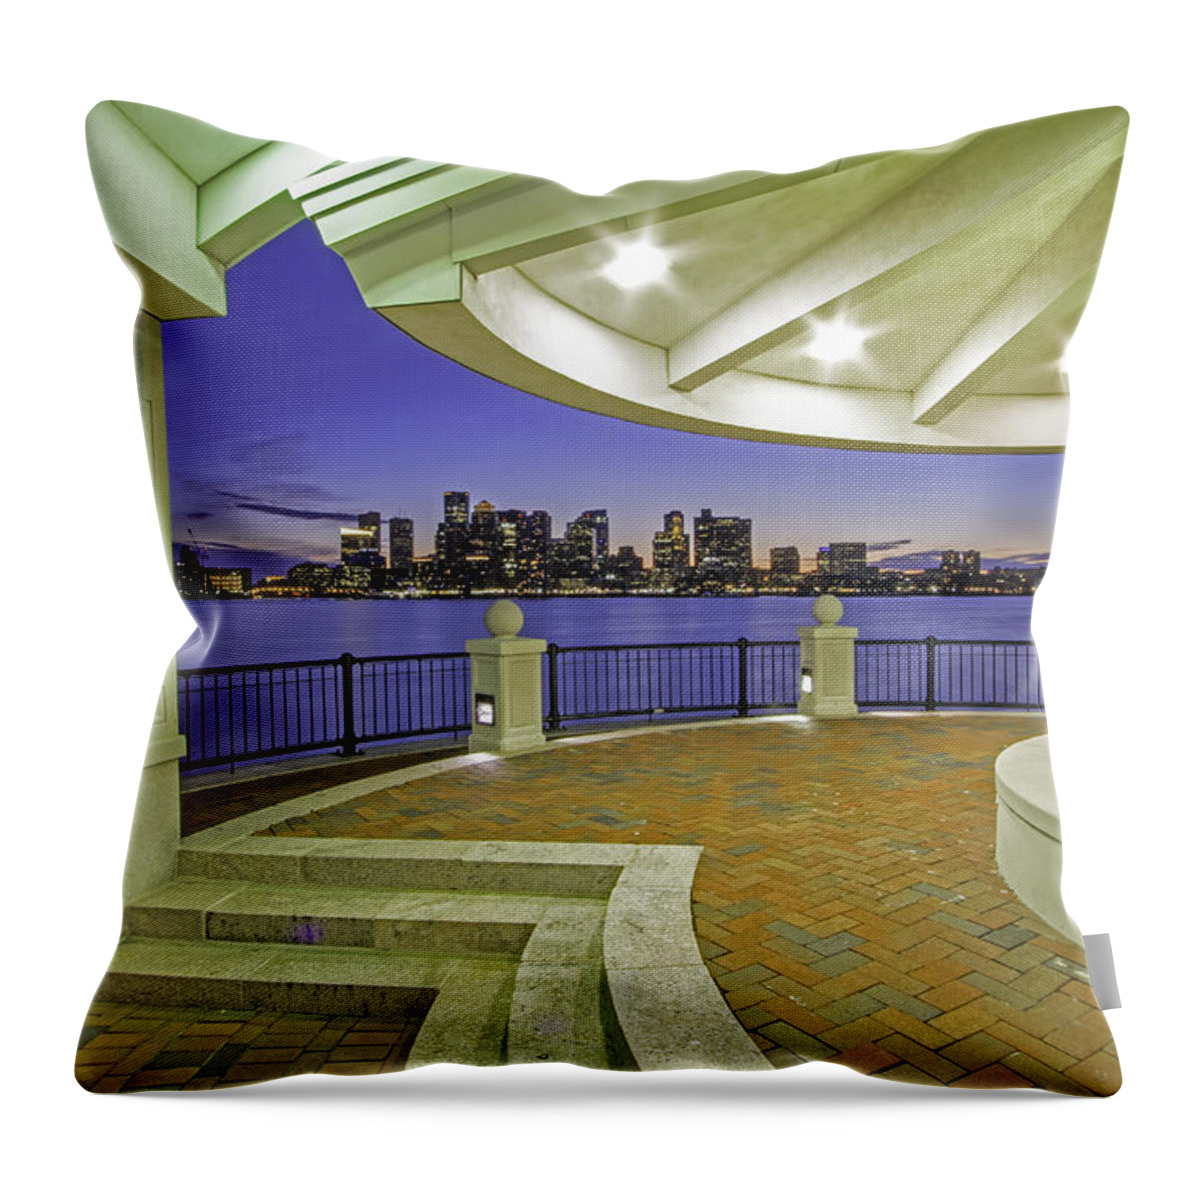 Boston City Skyline Throw Pillow featuring the photograph East Boston Piers Park View of Boston by Juergen Roth